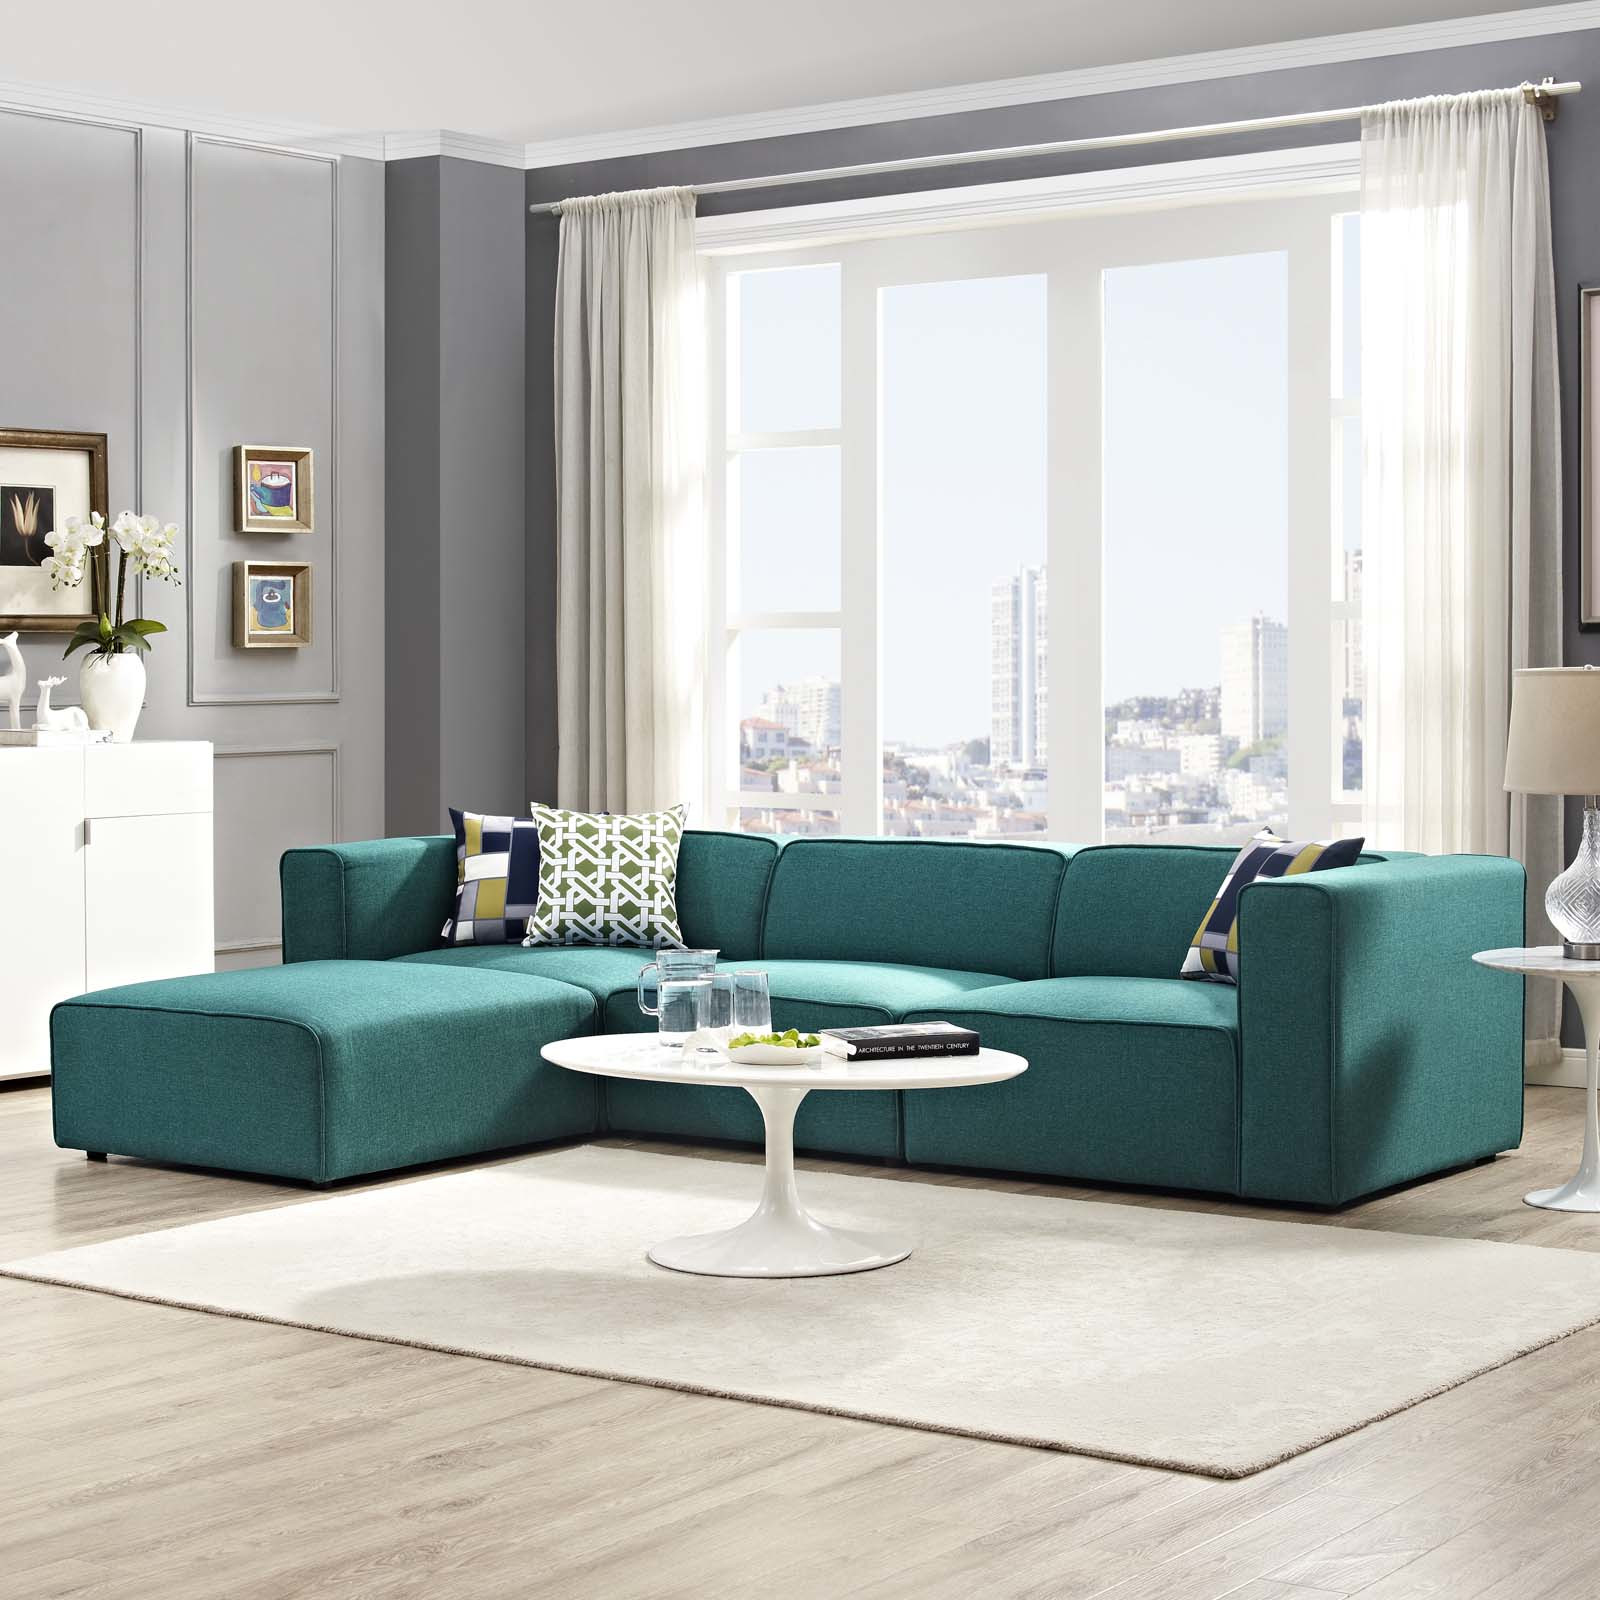 Best ideas about Living Room Sectional
. Save or Pin Modern & Contemporary Living Room Furniture Now.